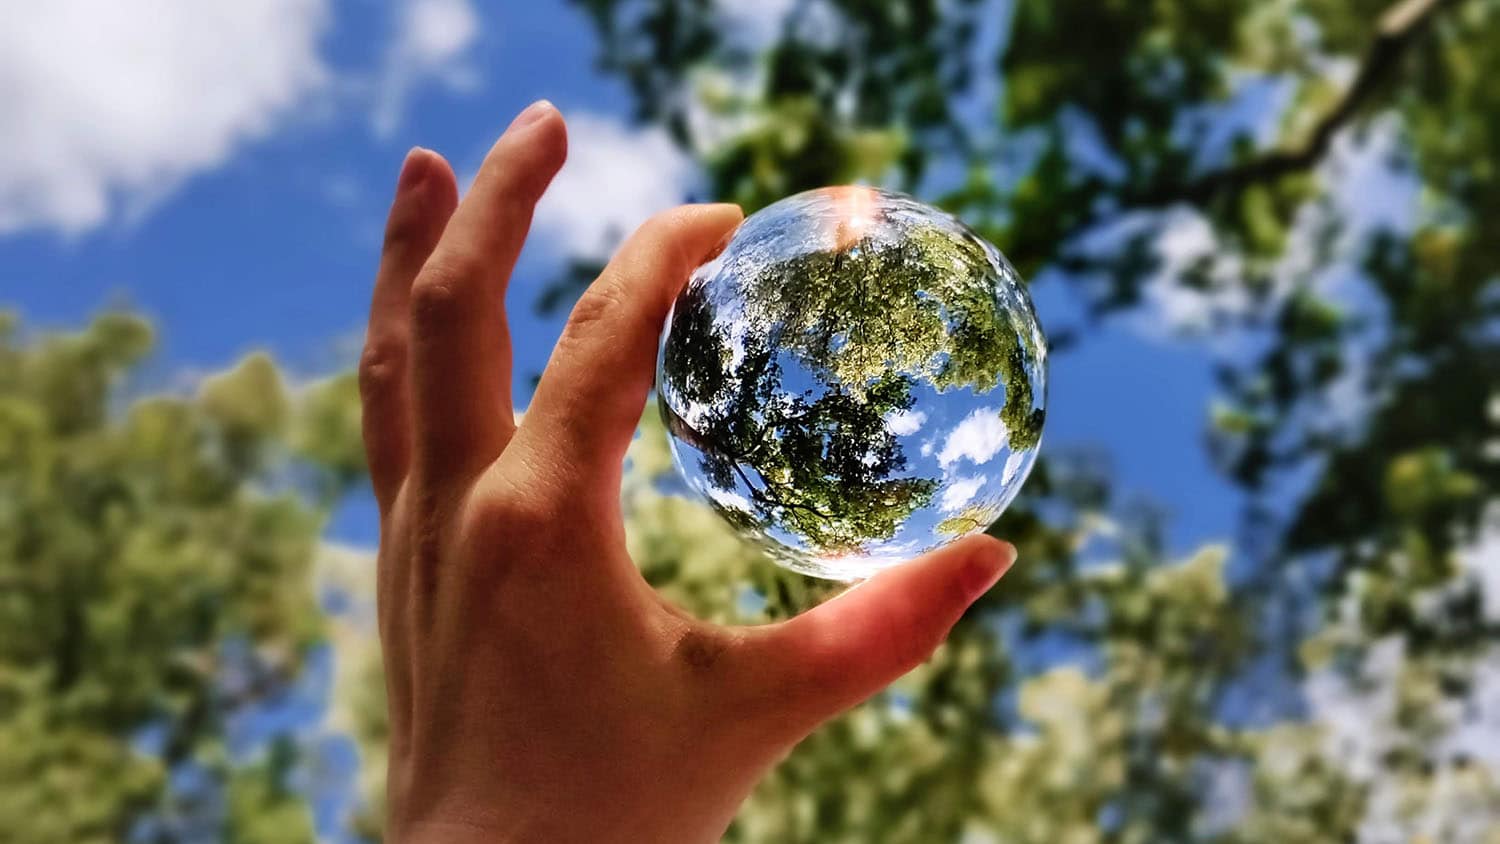 A hand holds a clear globe up to a background of blue skies and green leaves, creating an effect that looks similar to the Earth from space.